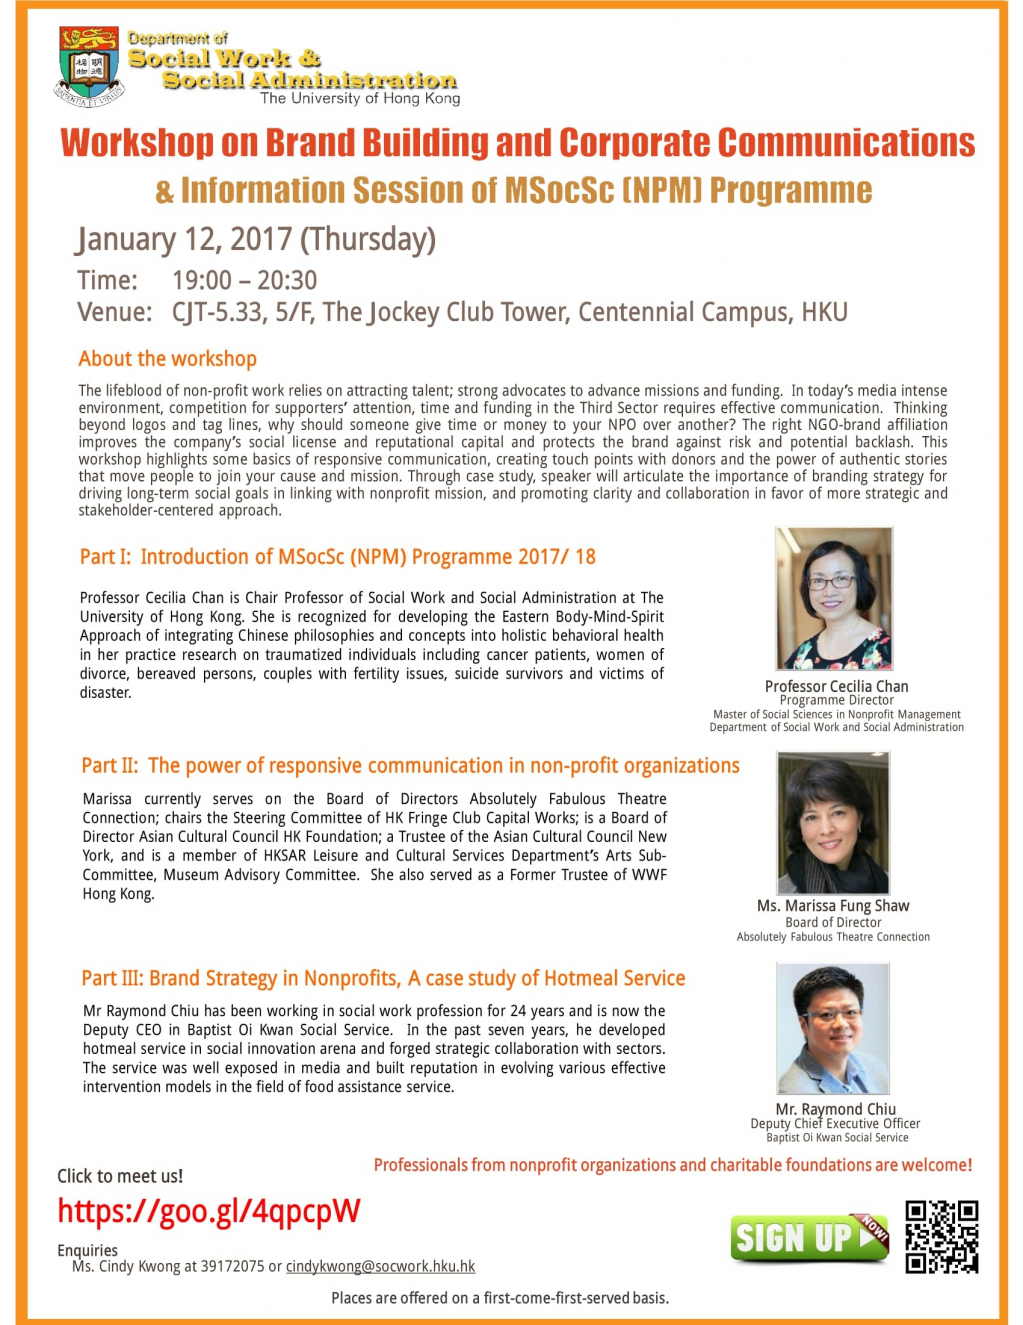 Information Session of Master of Social Sciences in Nonprofit Management Programme